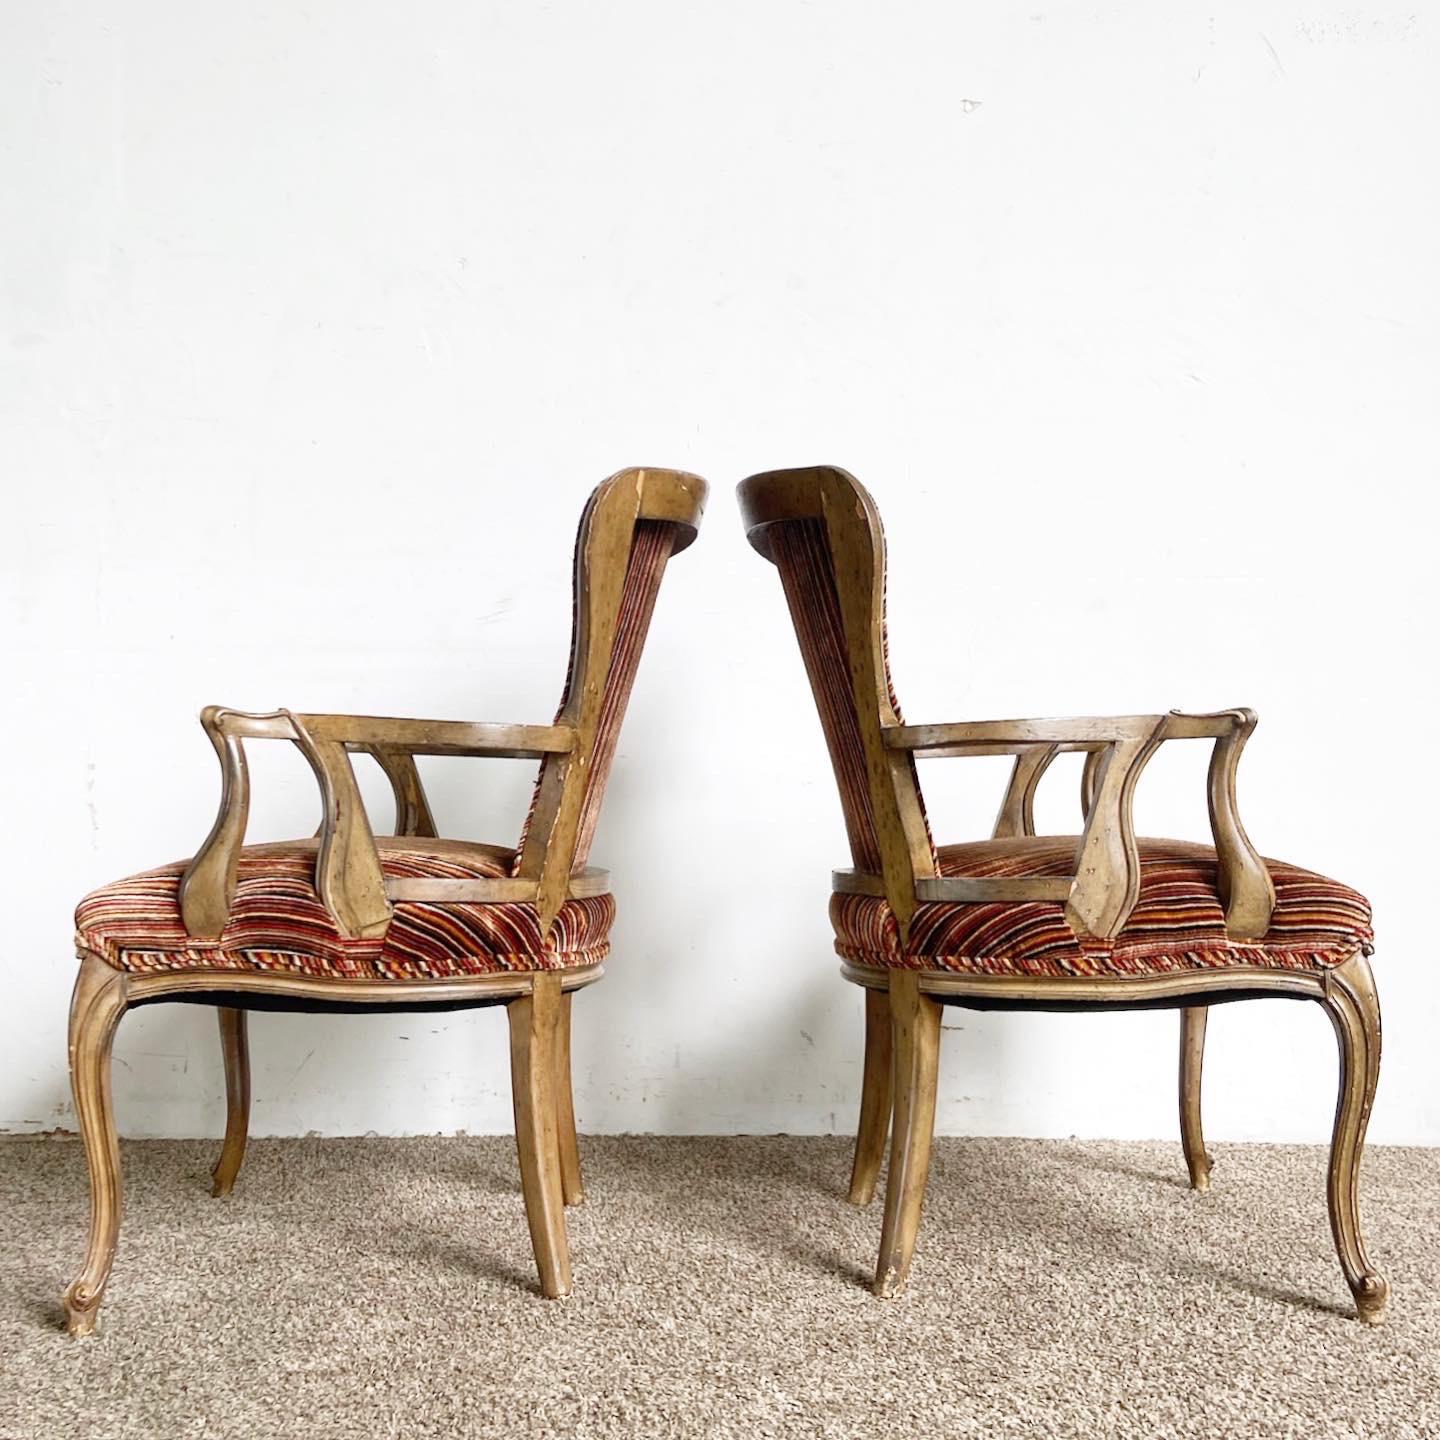 American Traditional Wooden Retro Fabric Arm Chairs - a Pair For Sale